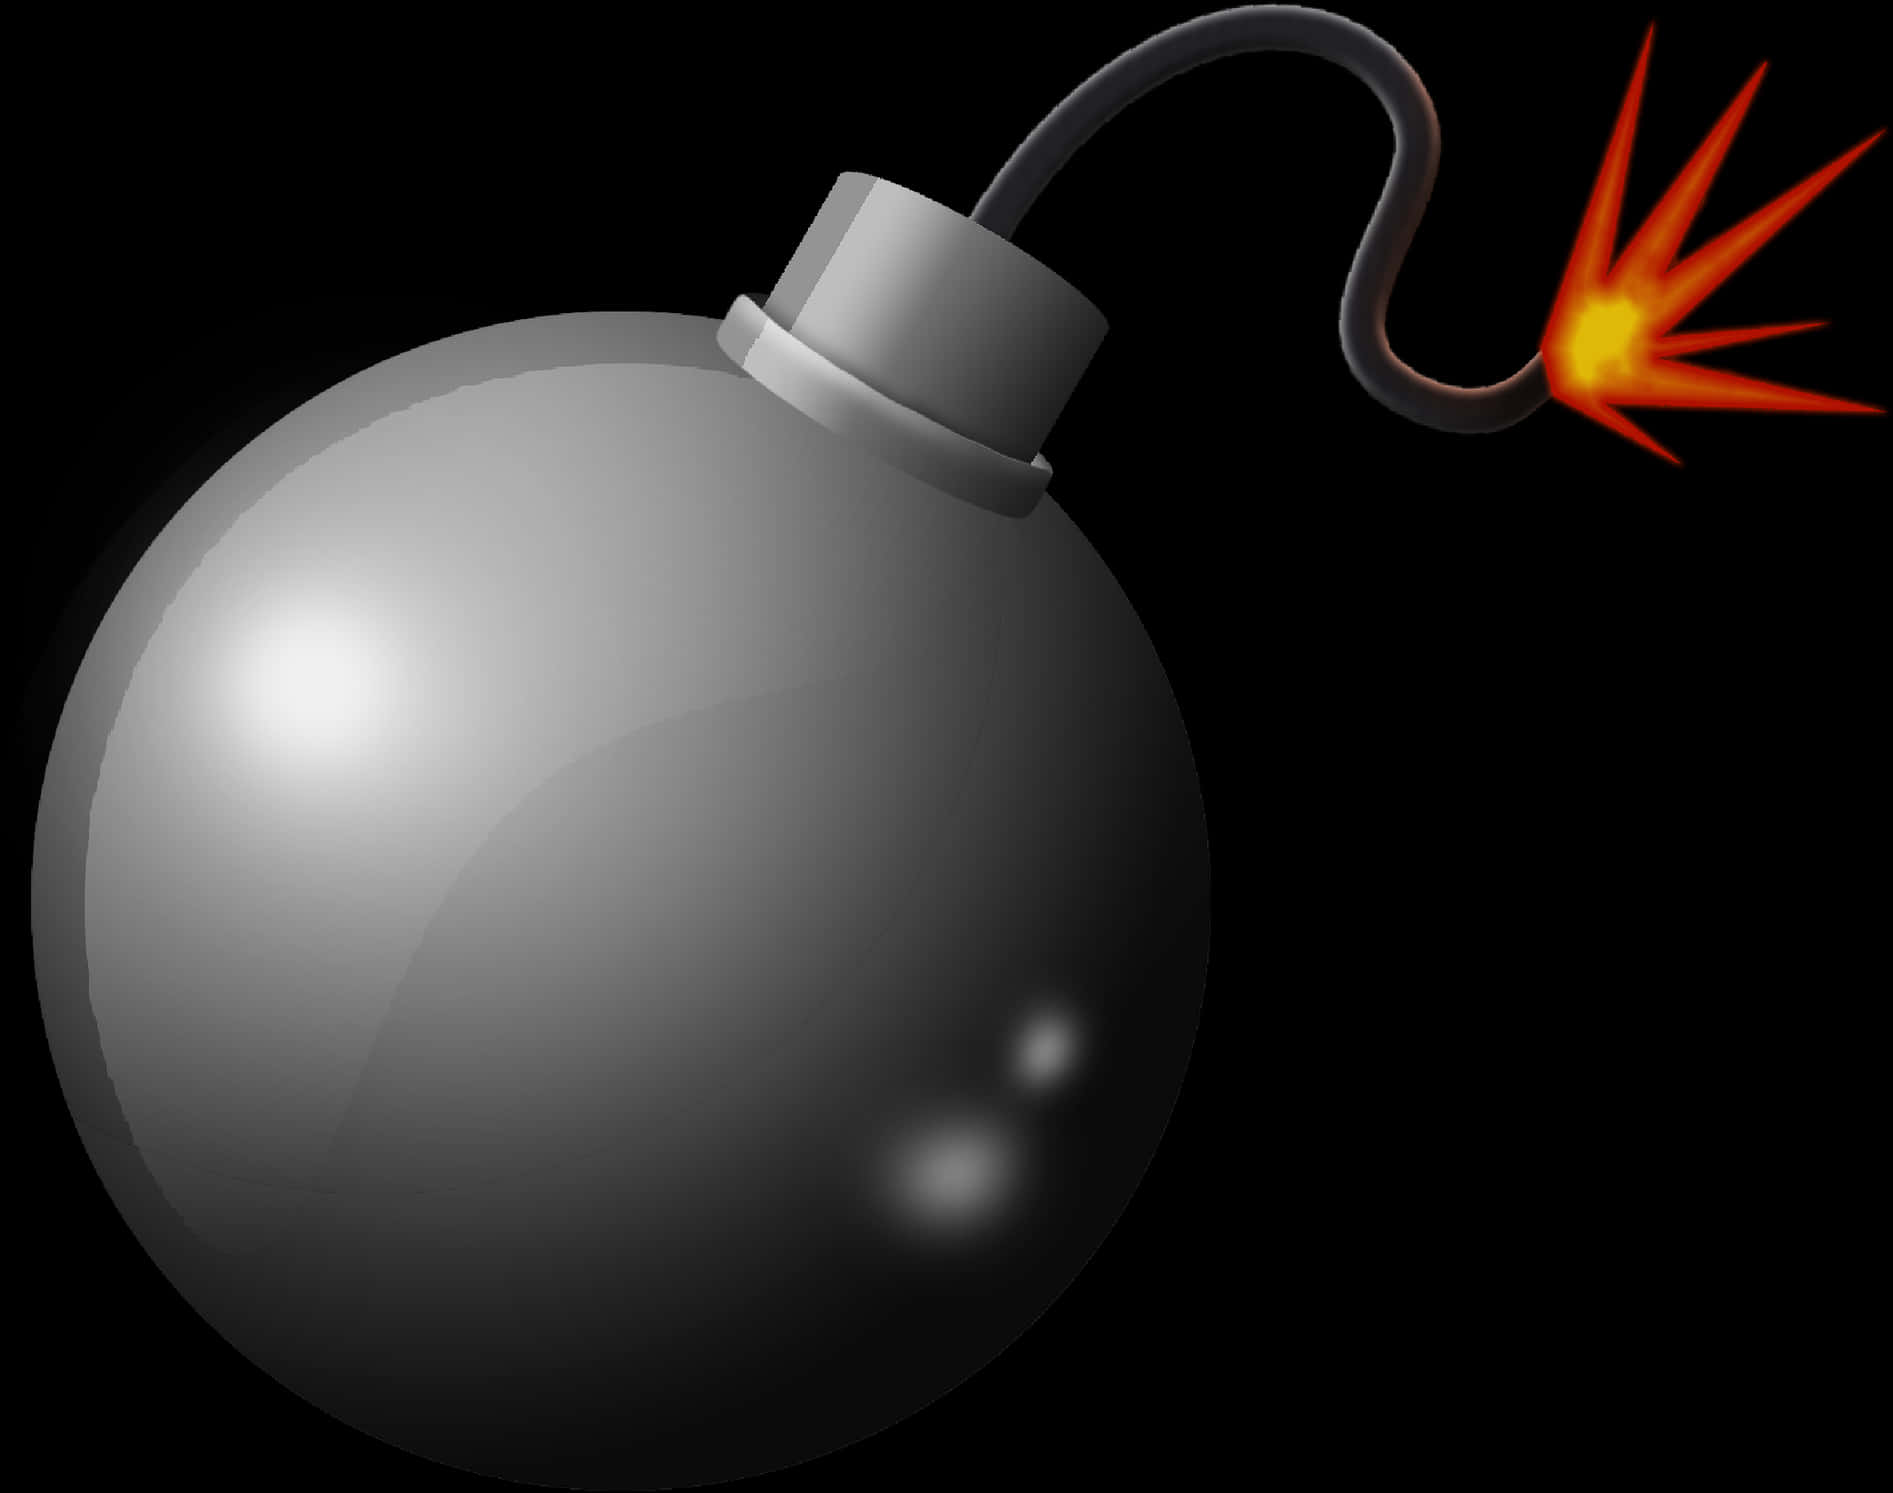 Classic Cartoon Bomb Ignition PNG image